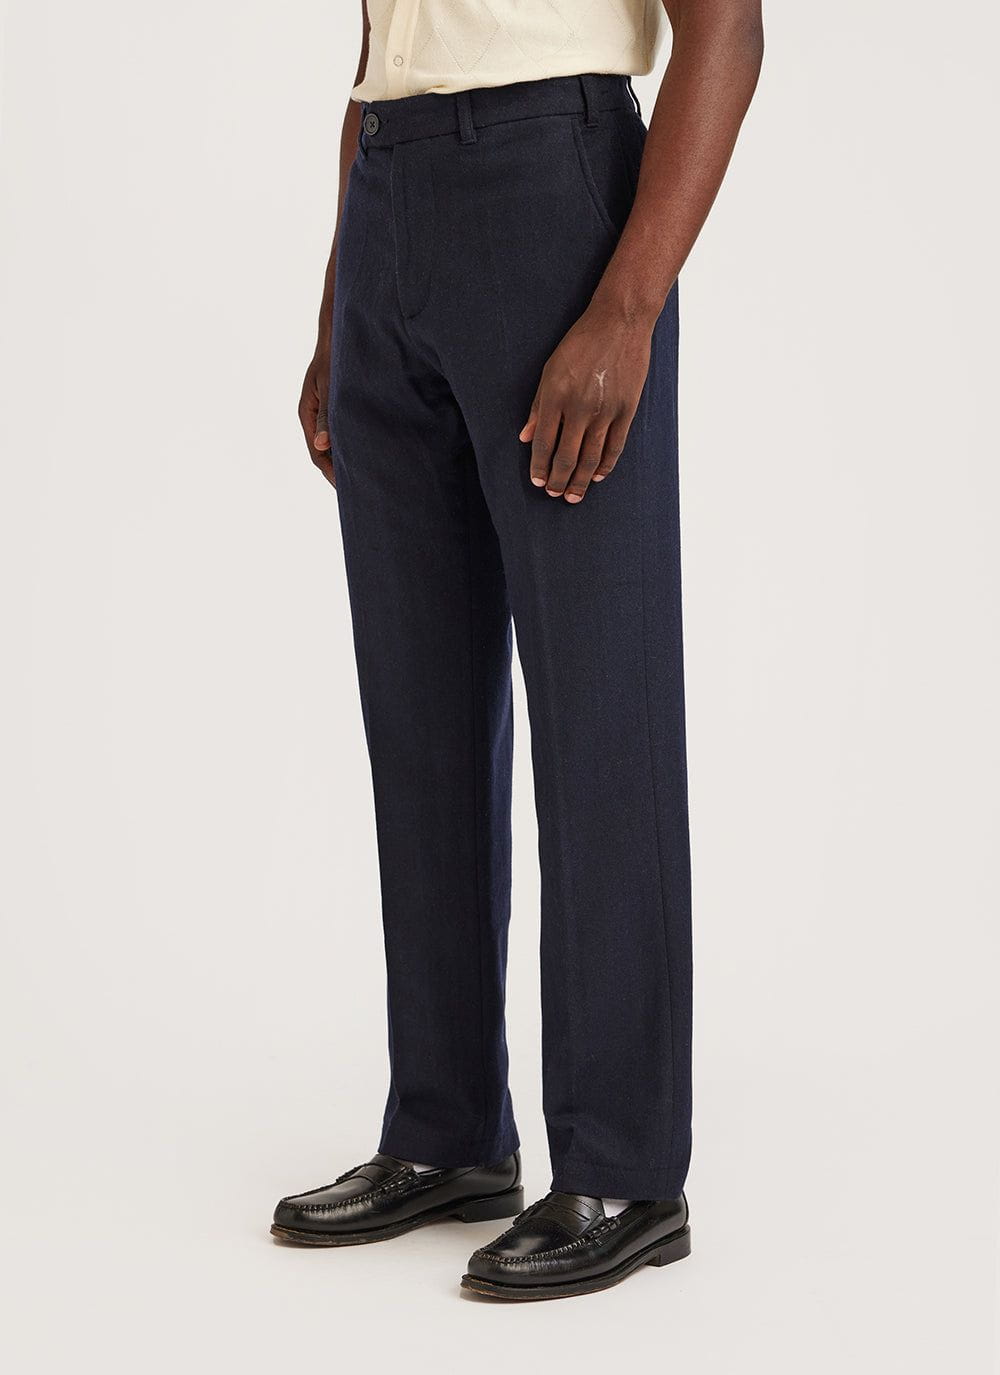 Black Sculpted tailored trousers | Tibi | MATCHES UK